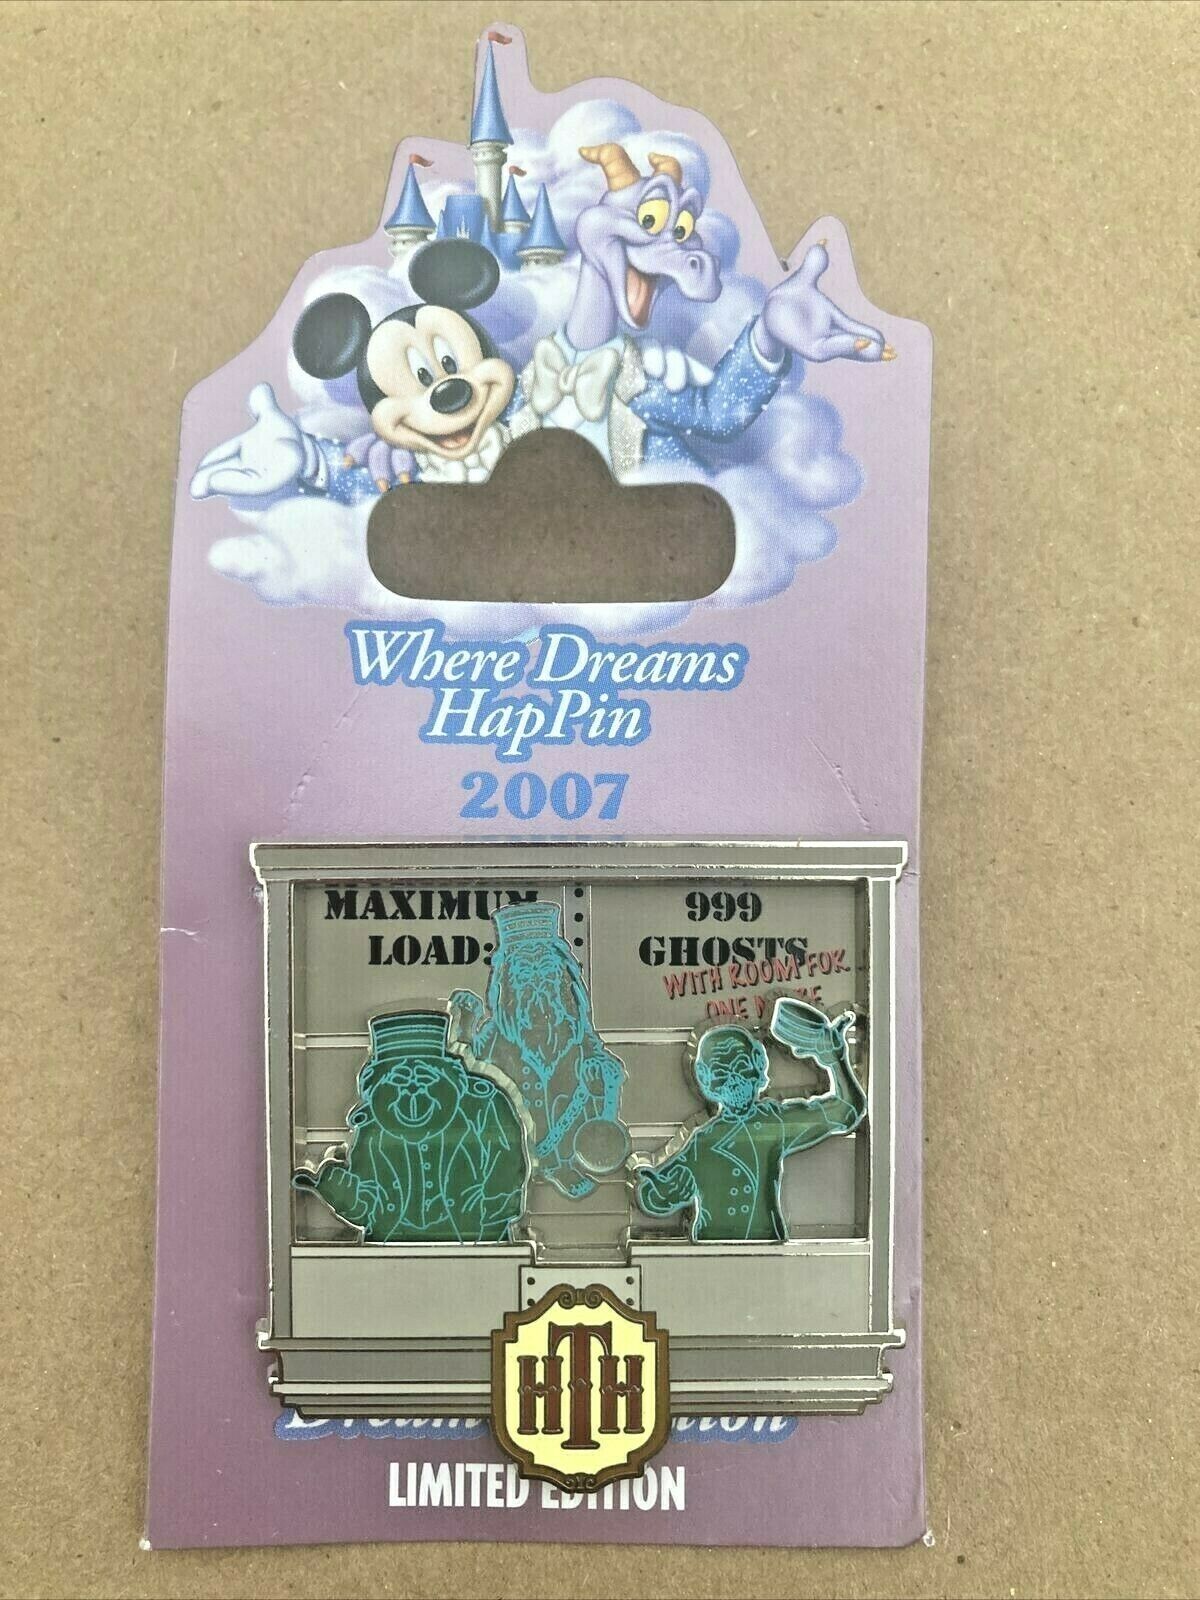 Where Dreams Happin Tower Of Hitchhiking Ghosts Disney Pin # 55075